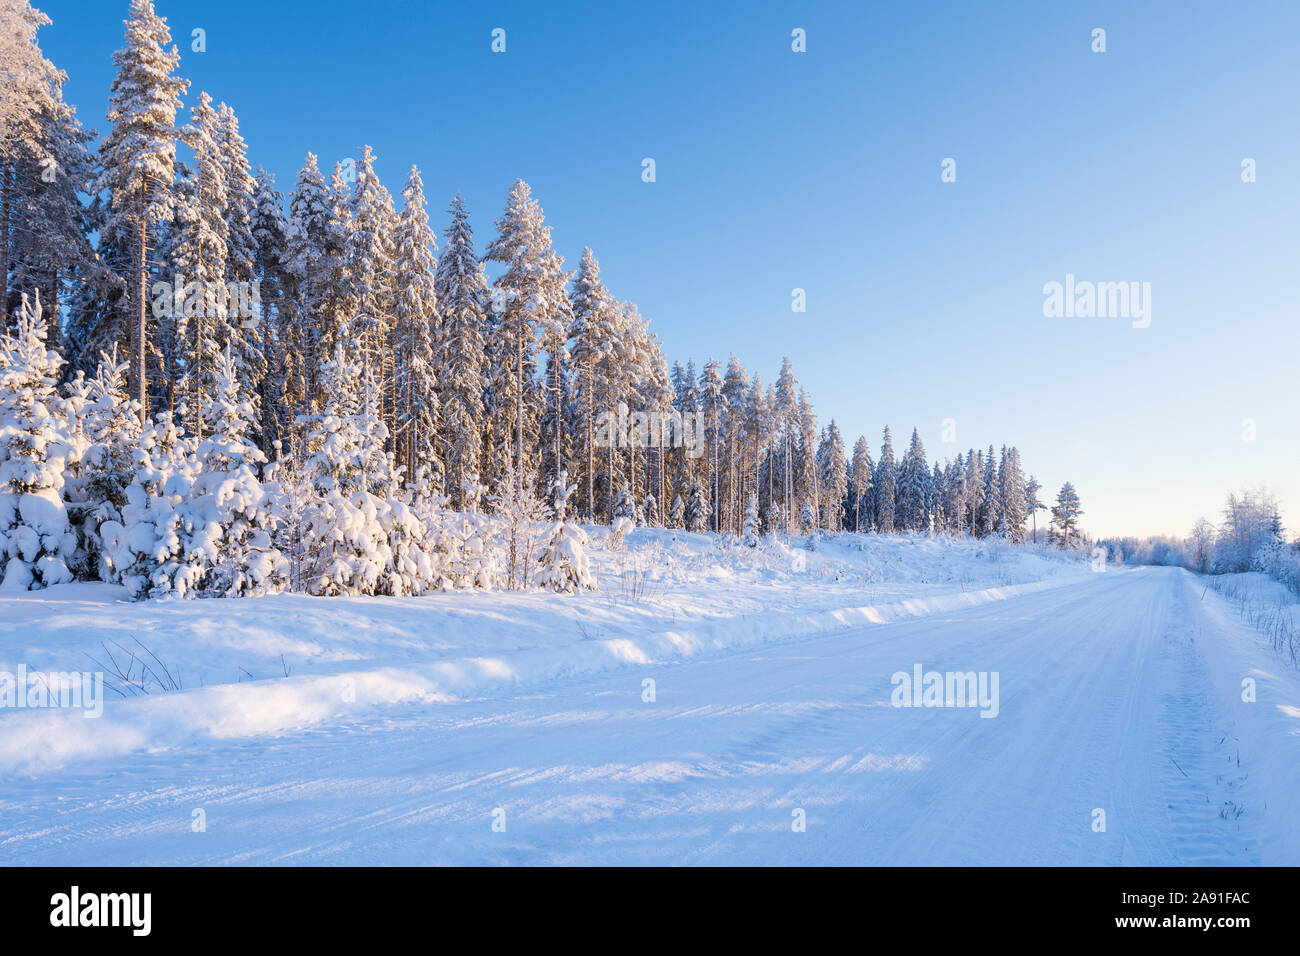 Country road in winter landscape, trees covered with snow, Finland Stock Photo